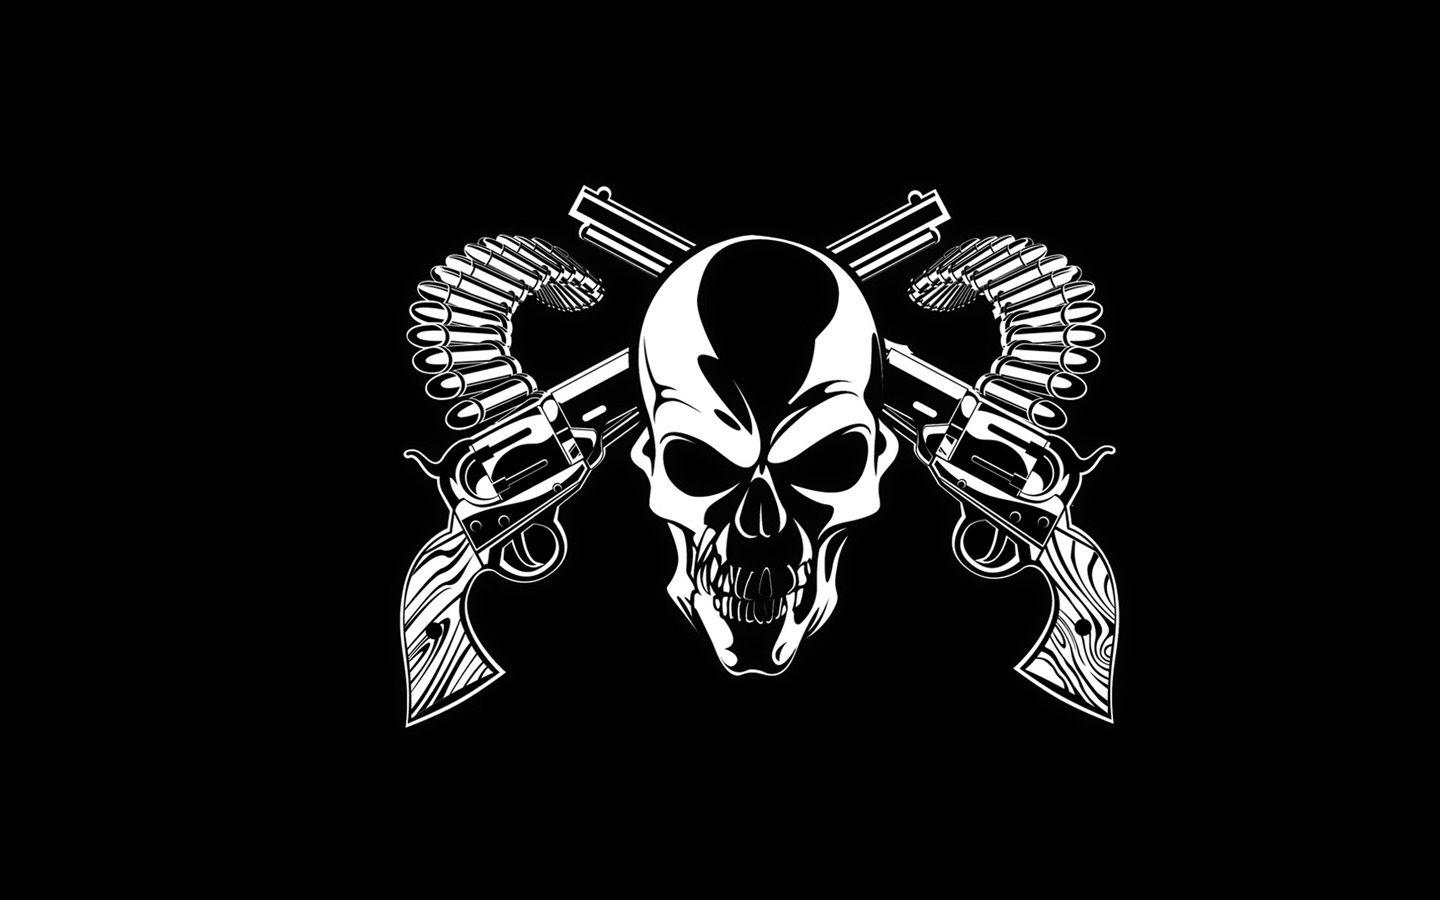 Animated Skull Wallpapers Top Free Animated Skull Backgrounds Wallpaperaccess